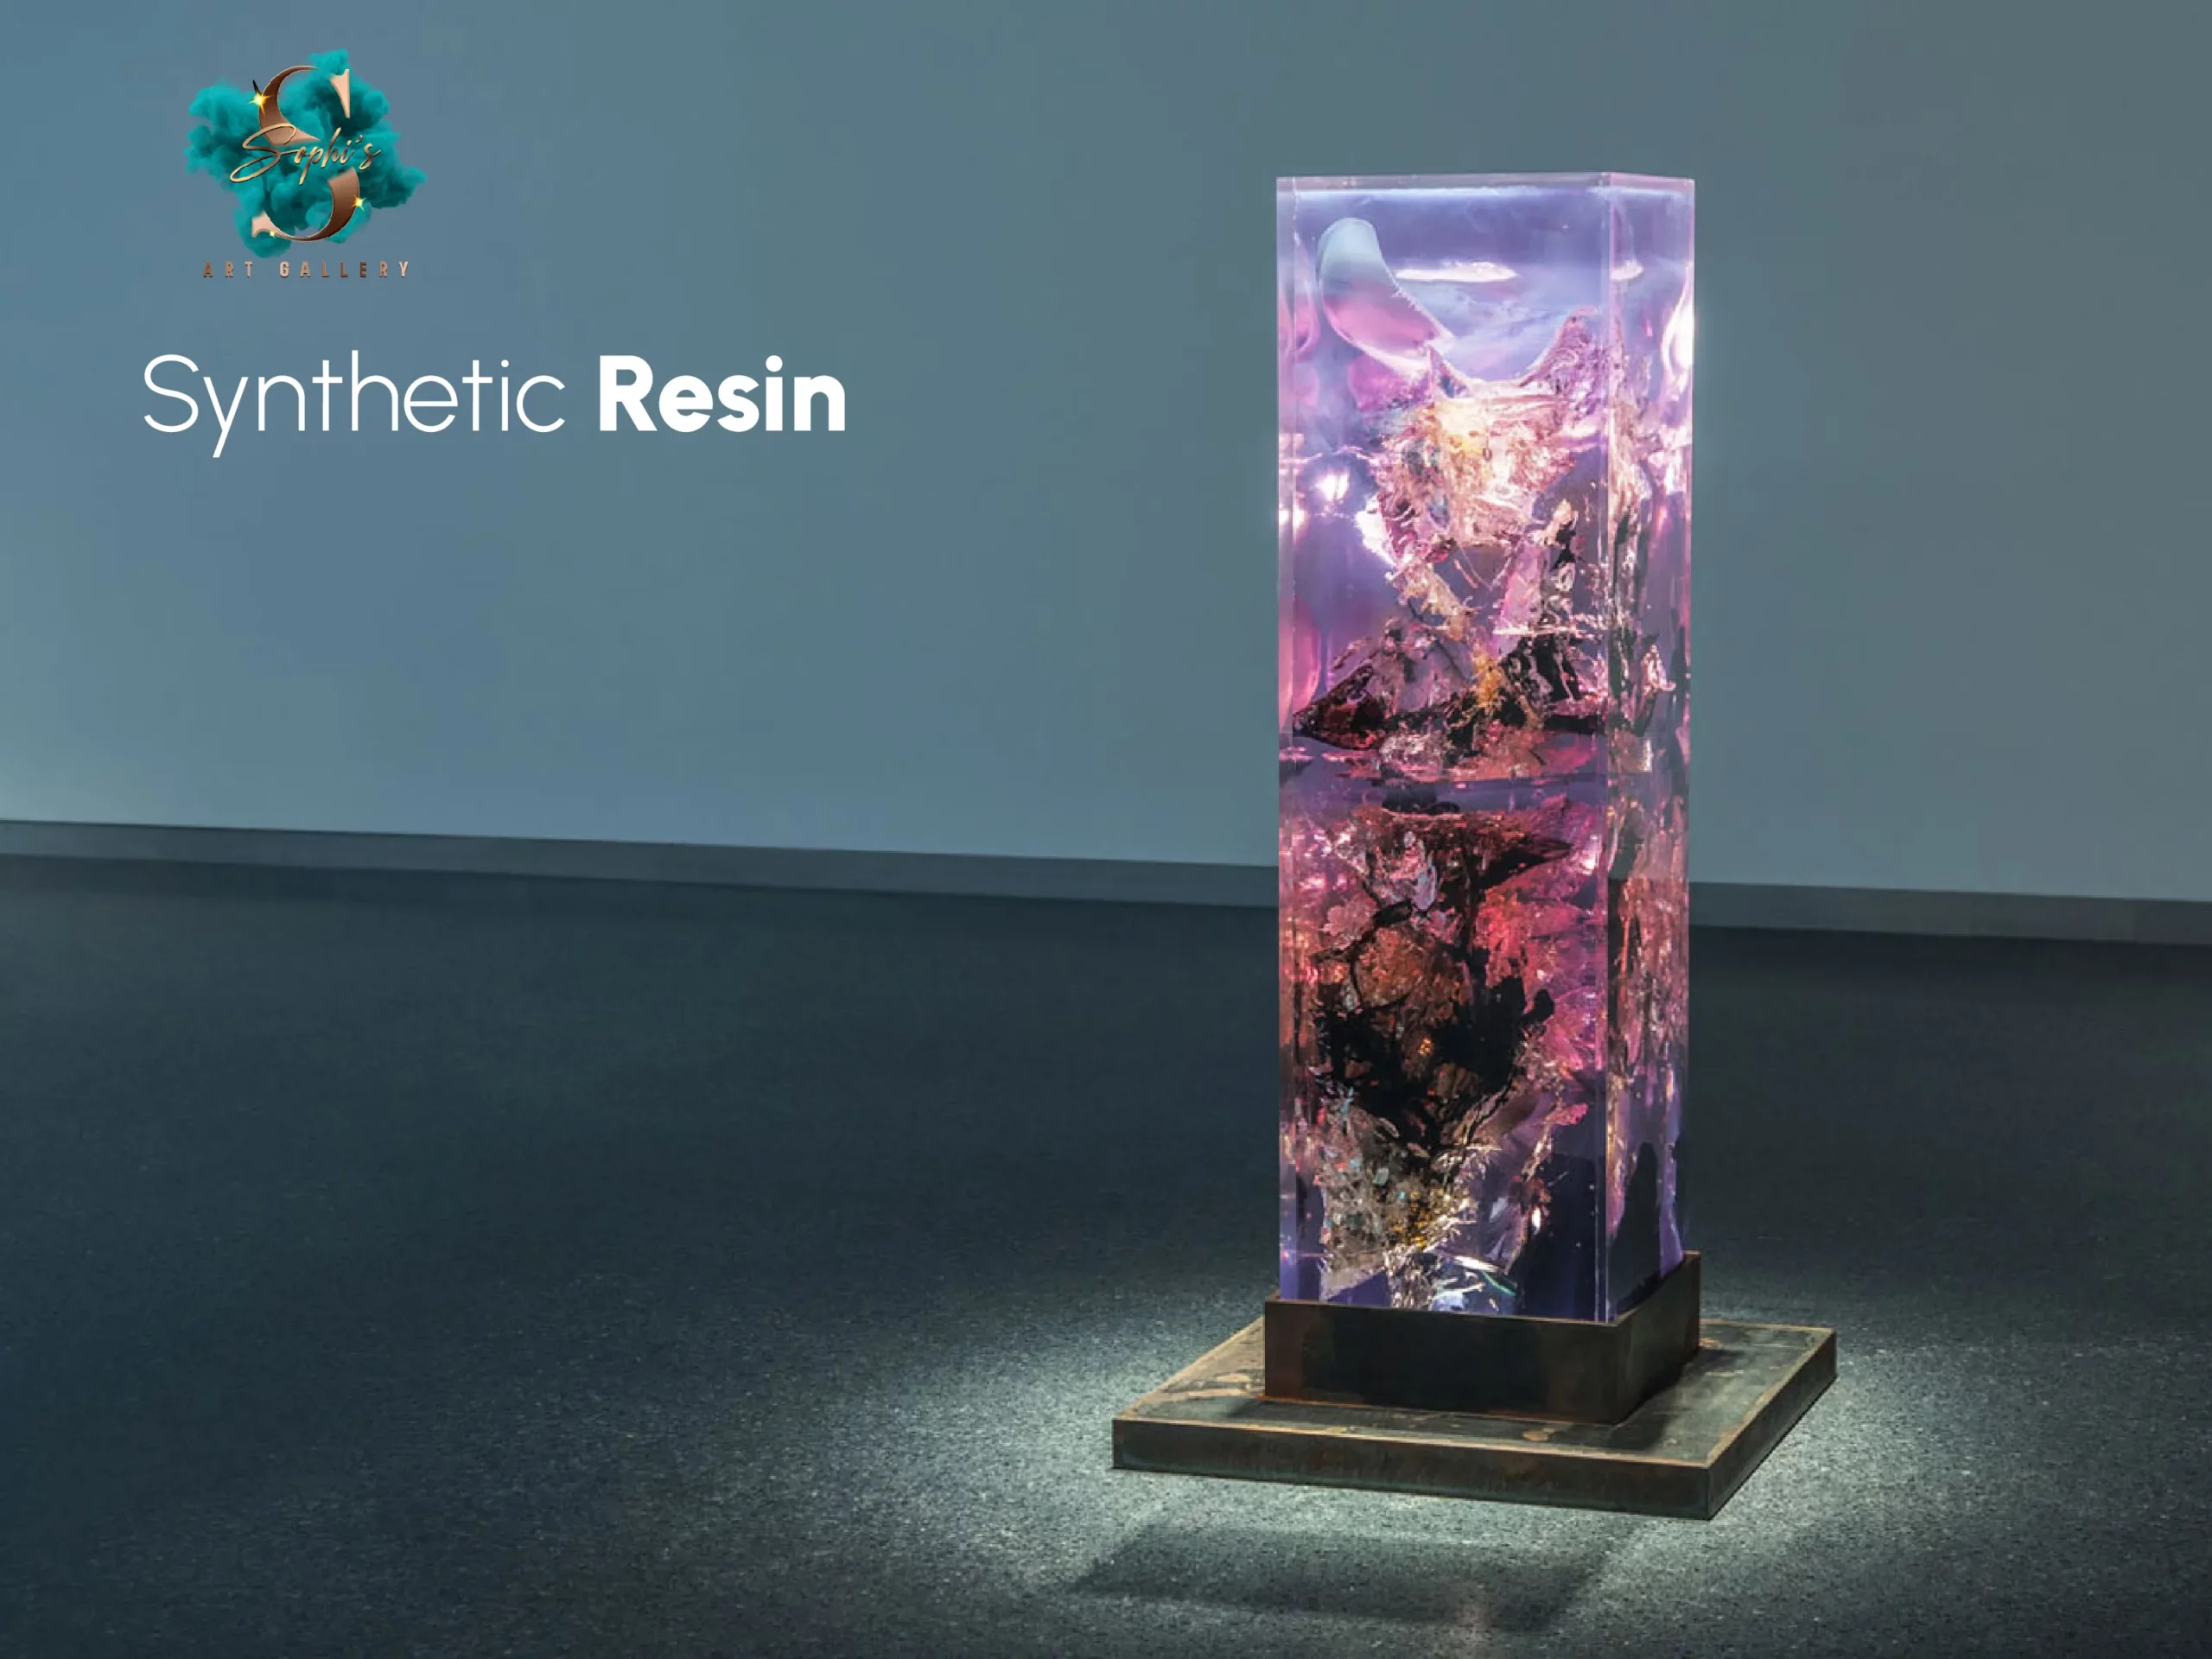 Synthetic resin